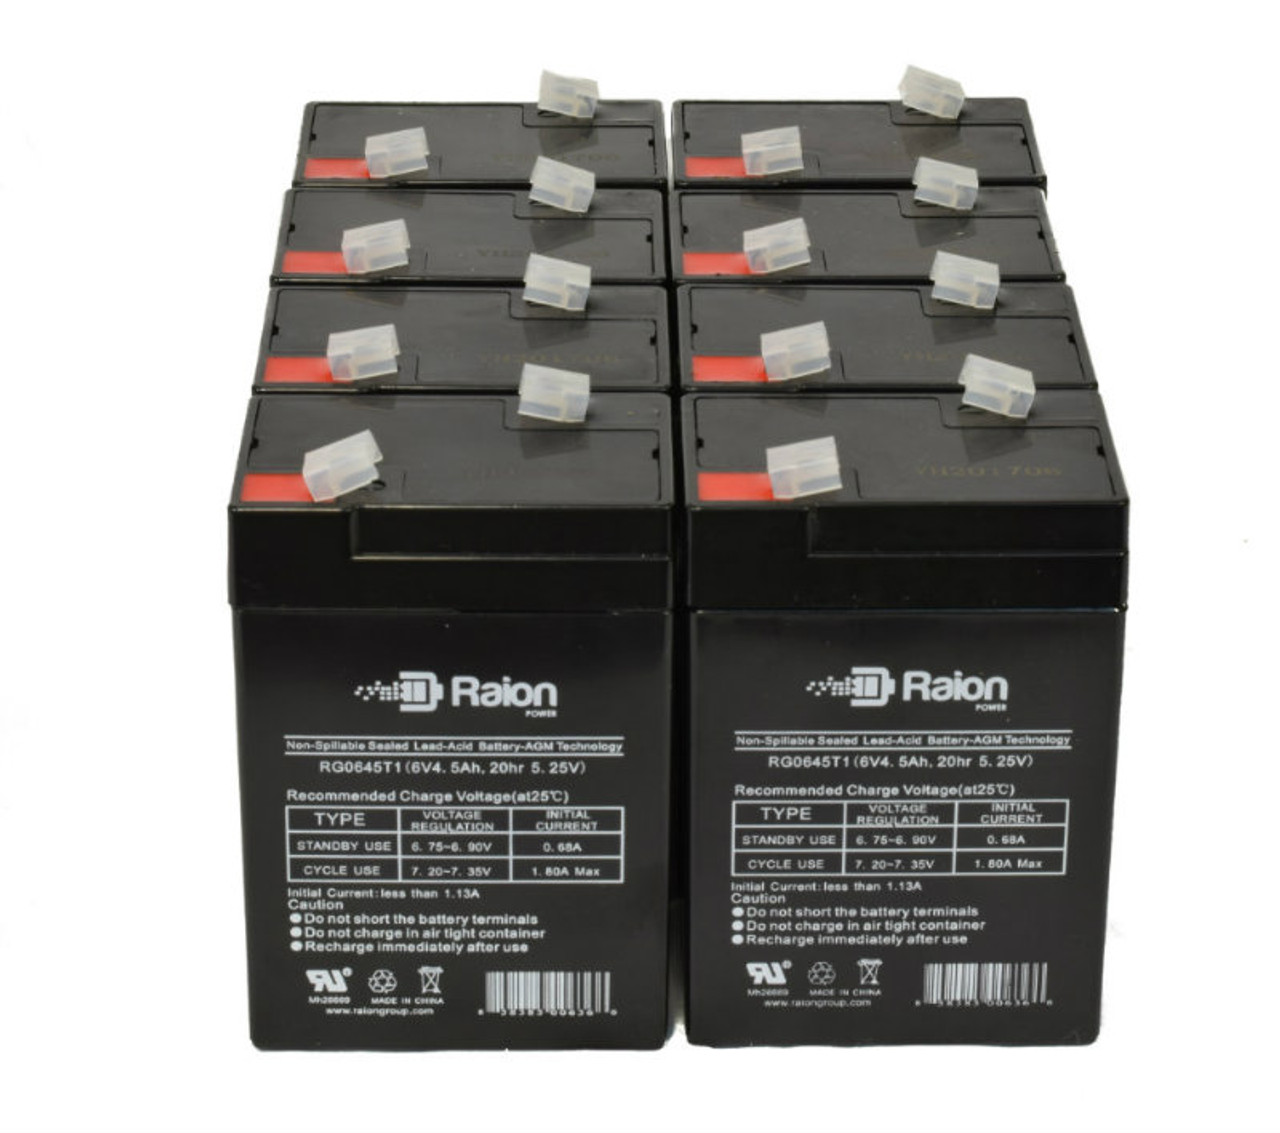 Raion Power 6V 4.5Ah Replacement Emergency Light Battery for Emergency EML-990 - 8 Pack